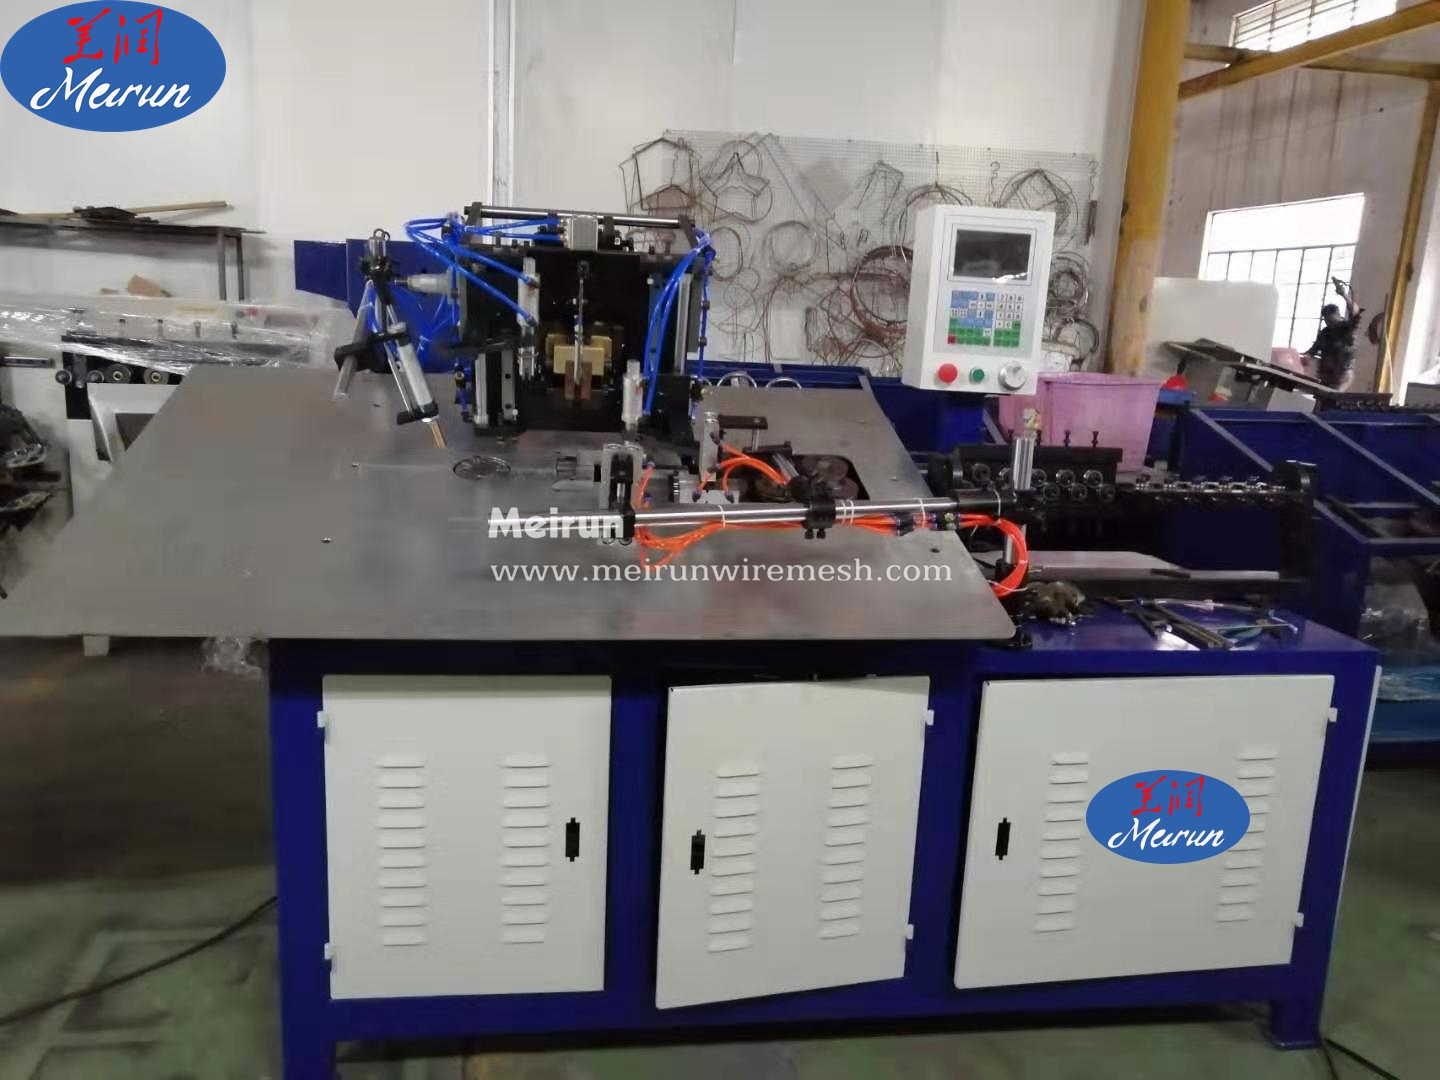  2D CNC Hydraulic Small Wire Bending Machine with Cheaper Price